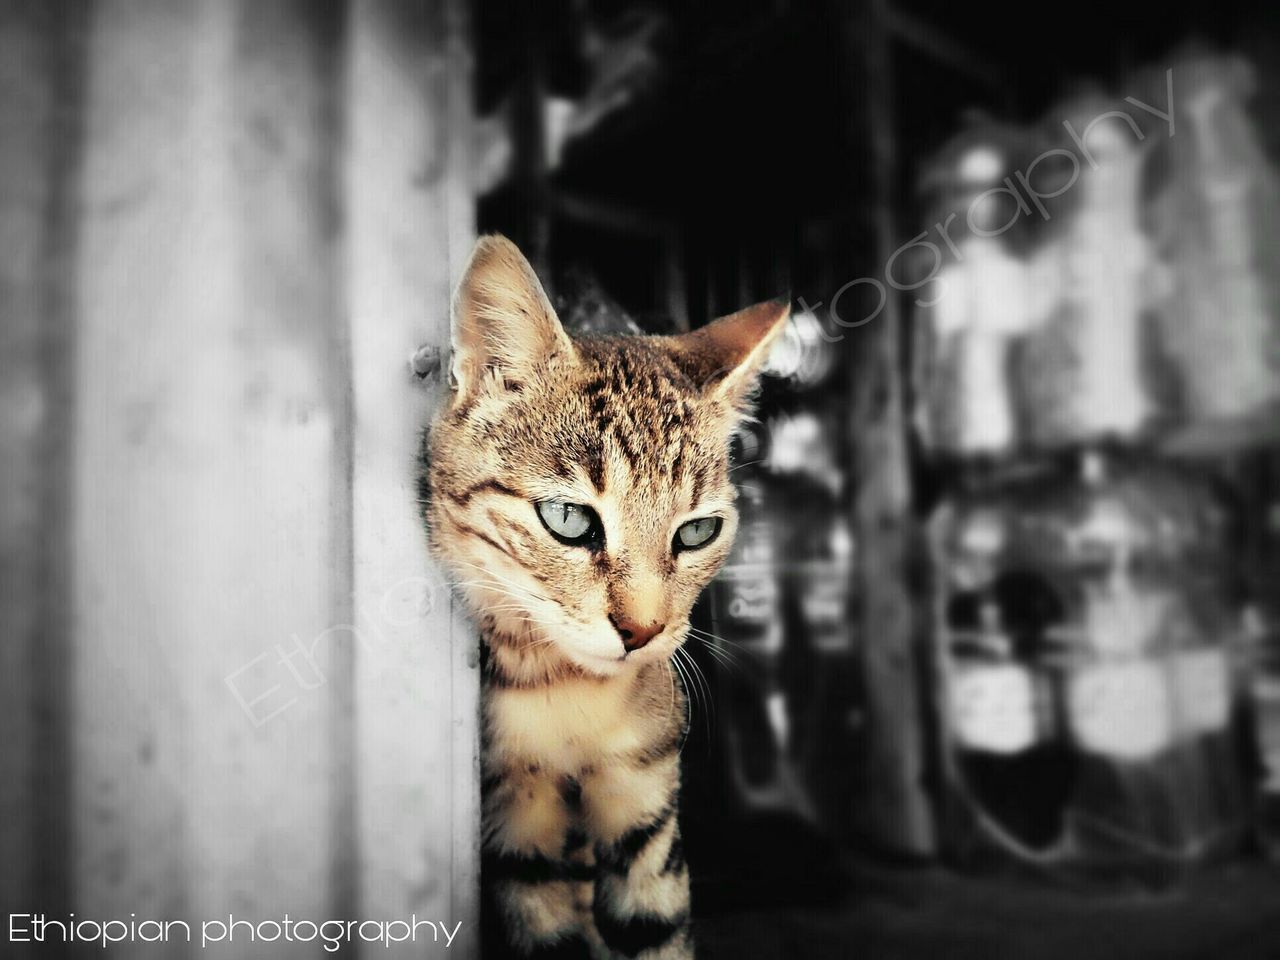 animal themes, feline, cat, animal, one animal, mammal, pets, domestic animals, domestic cat, domestic, vertebrate, no people, looking away, indoors, looking, selective focus, whisker, portrait, focus on foreground, animal body part, animal head